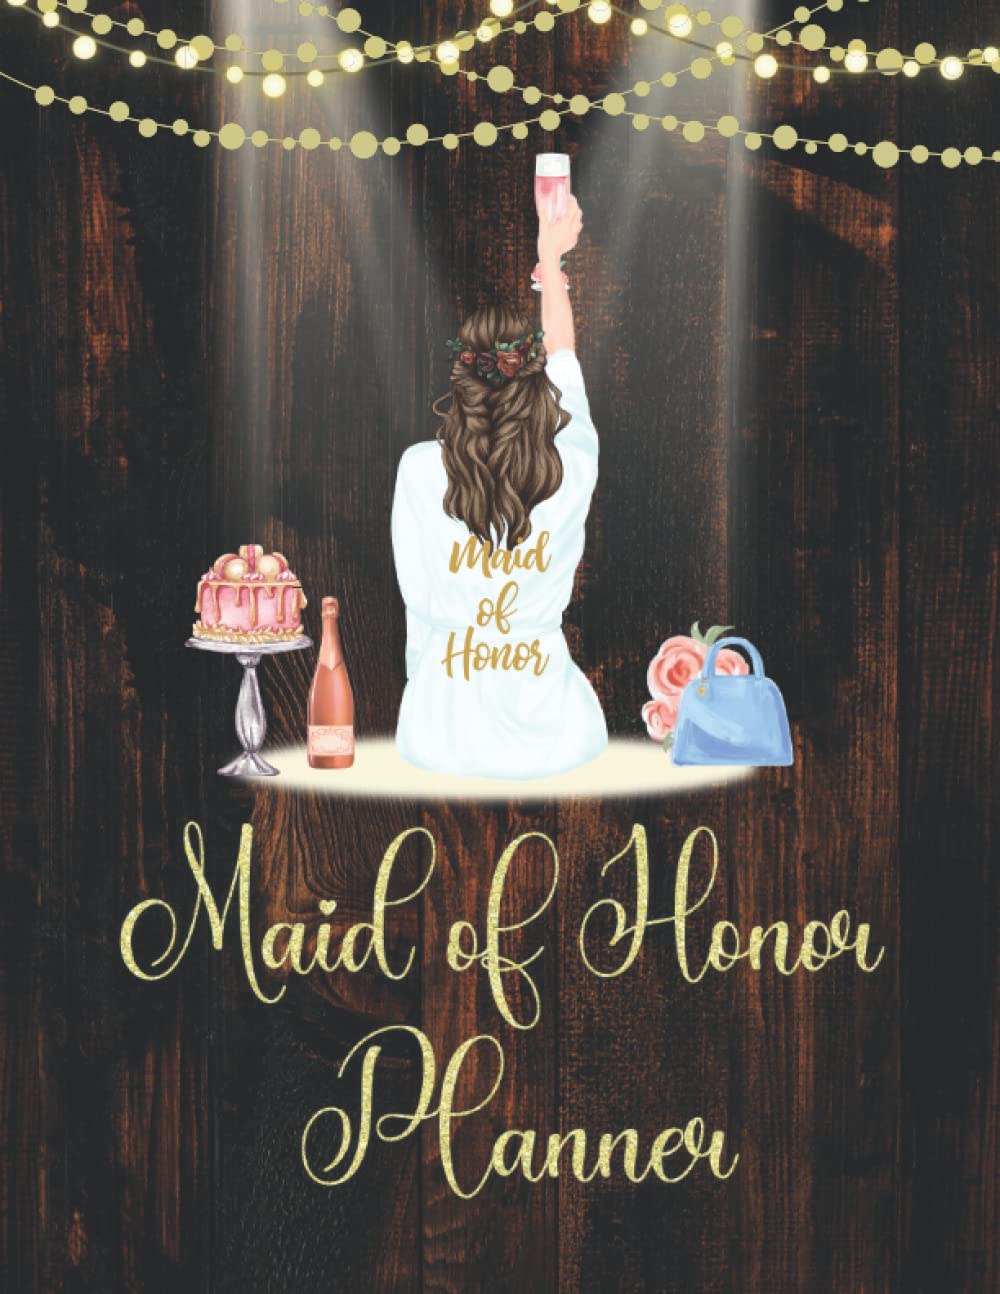 Maid Of Honor Planner: Wedding Duties Checklist Organizer with Floral Interior for Maid or Matron Of Honour | Bachelorette Party and Bridal Shower Planning | Proposal Gifts From The Bride